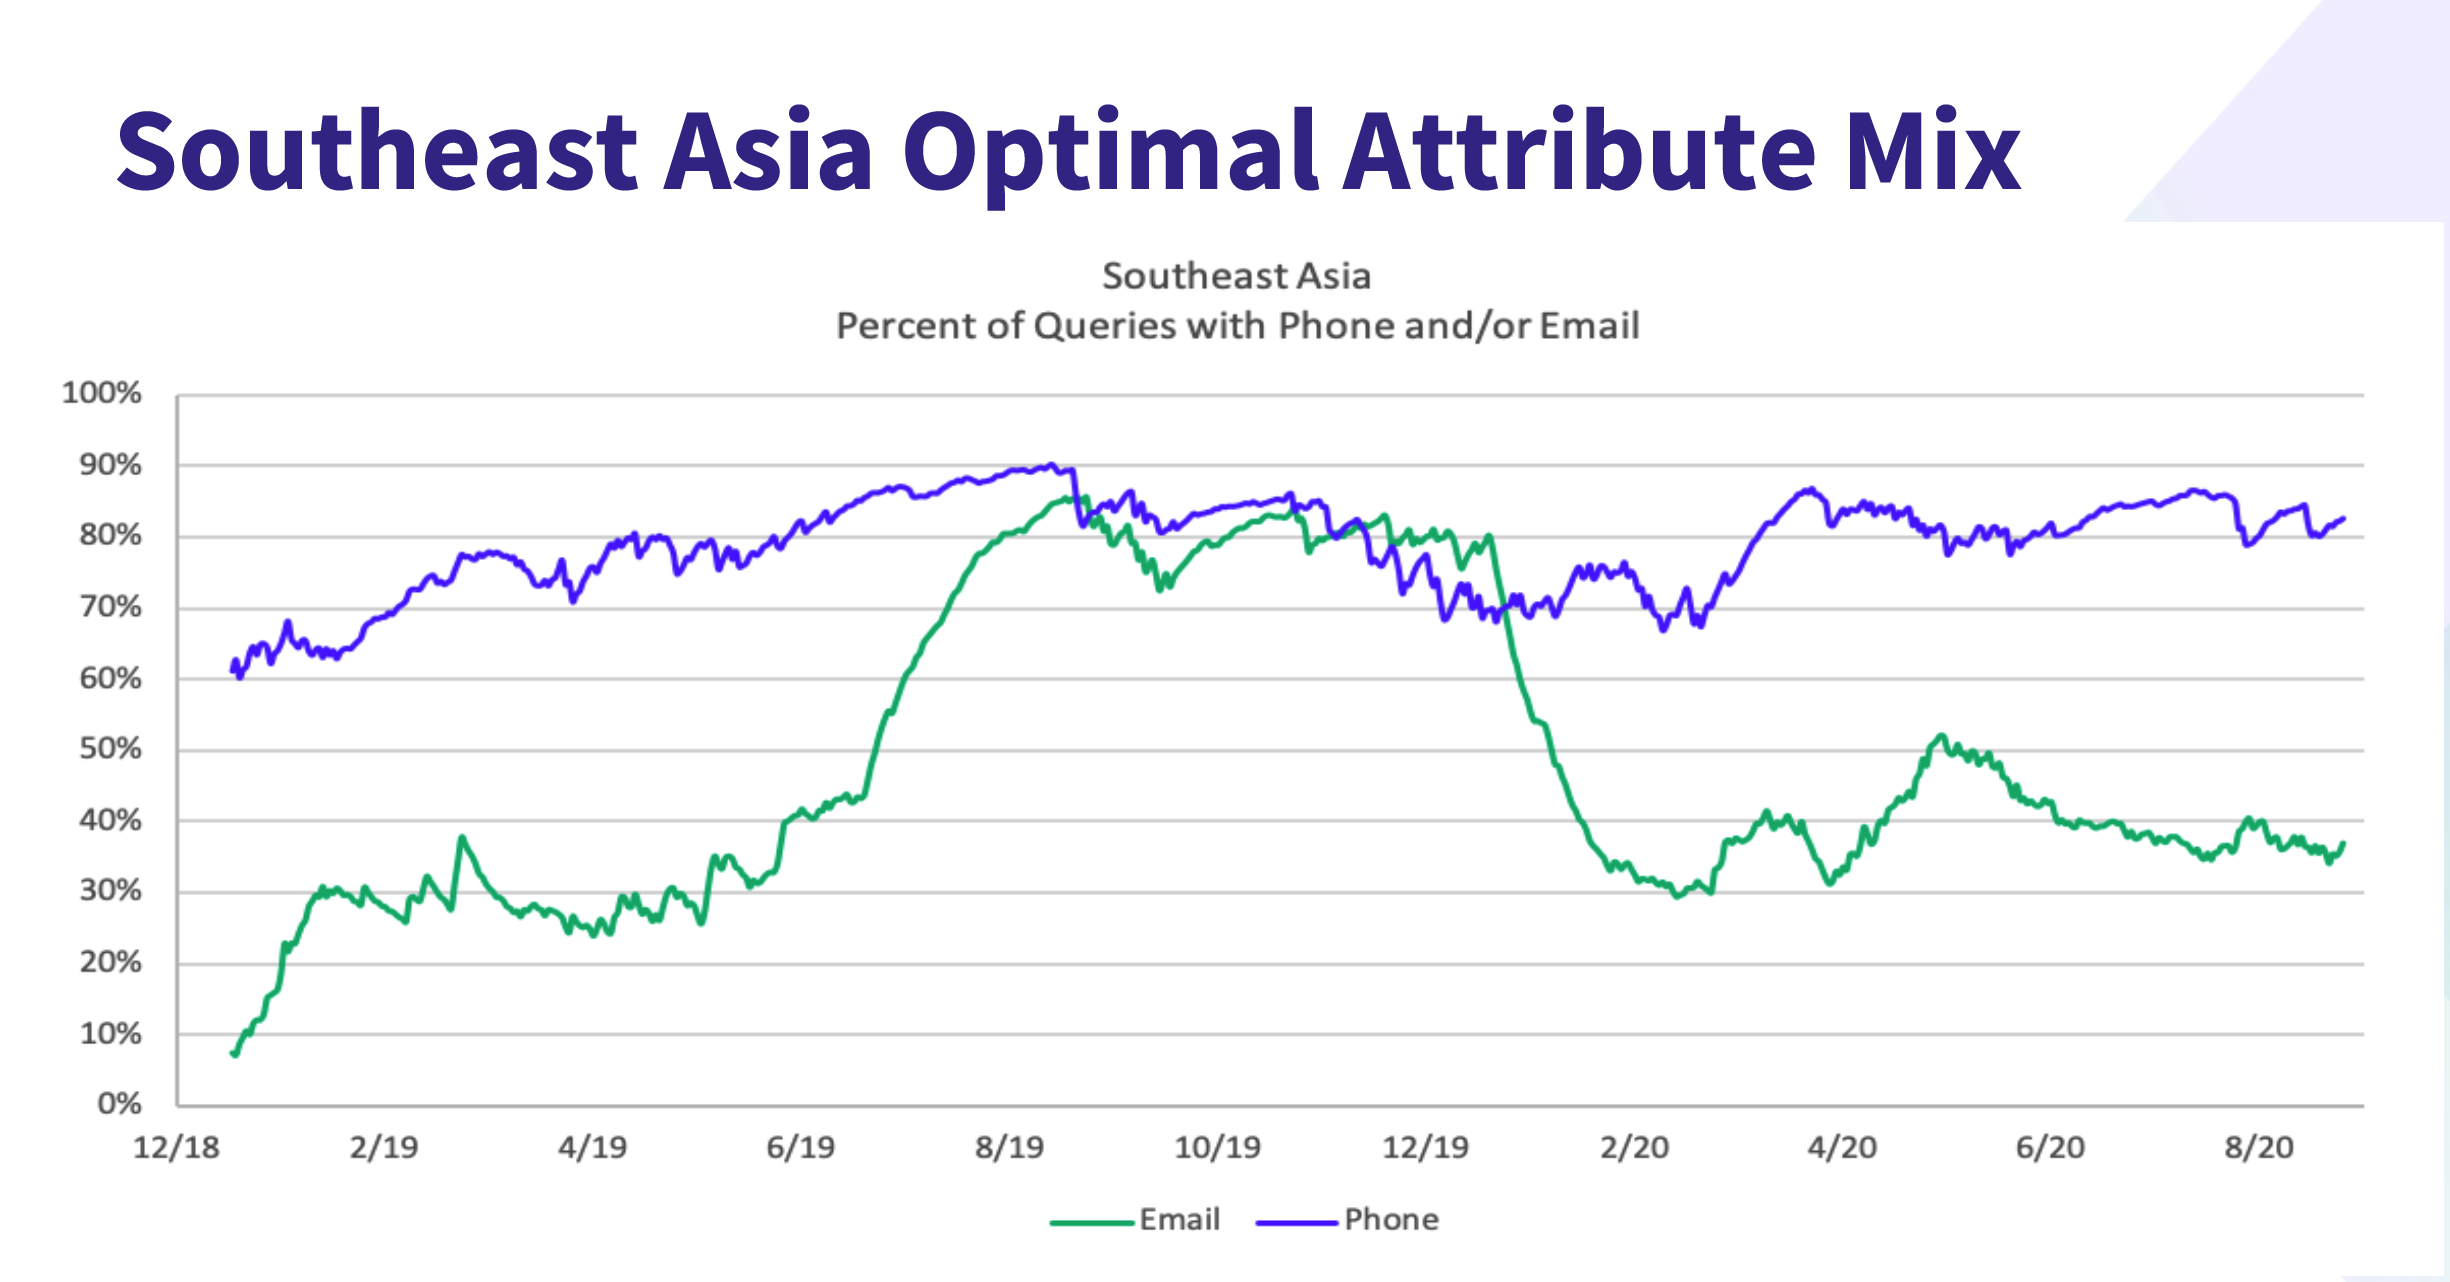 Southeast Asia Optimal Attribute Mix for Queries